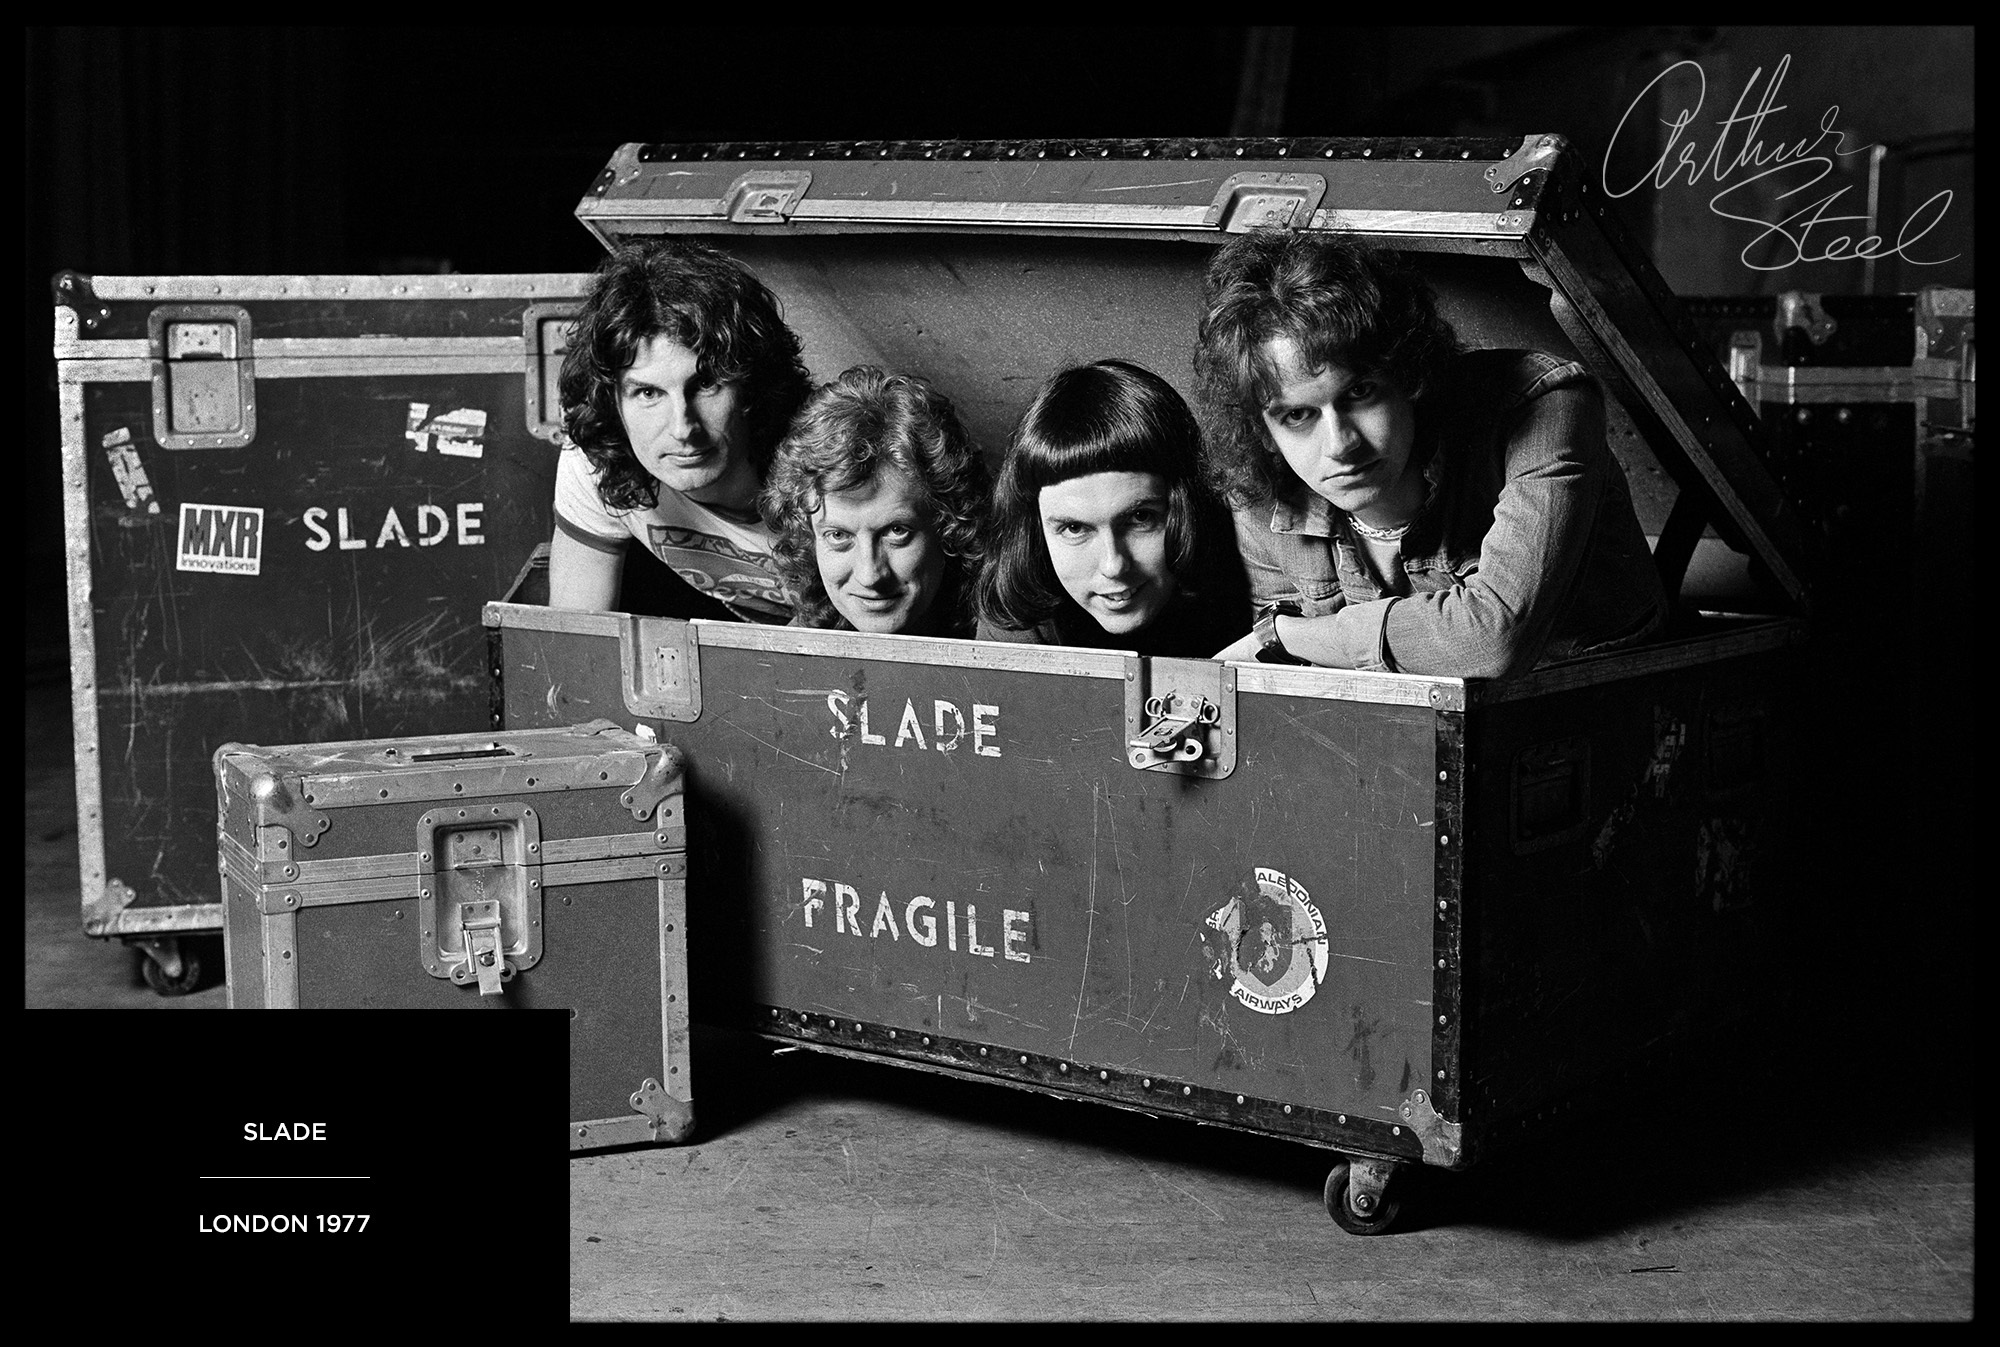 An exclusive limited edition photograph of the rock band Slade by Photographer Arthur Steel.